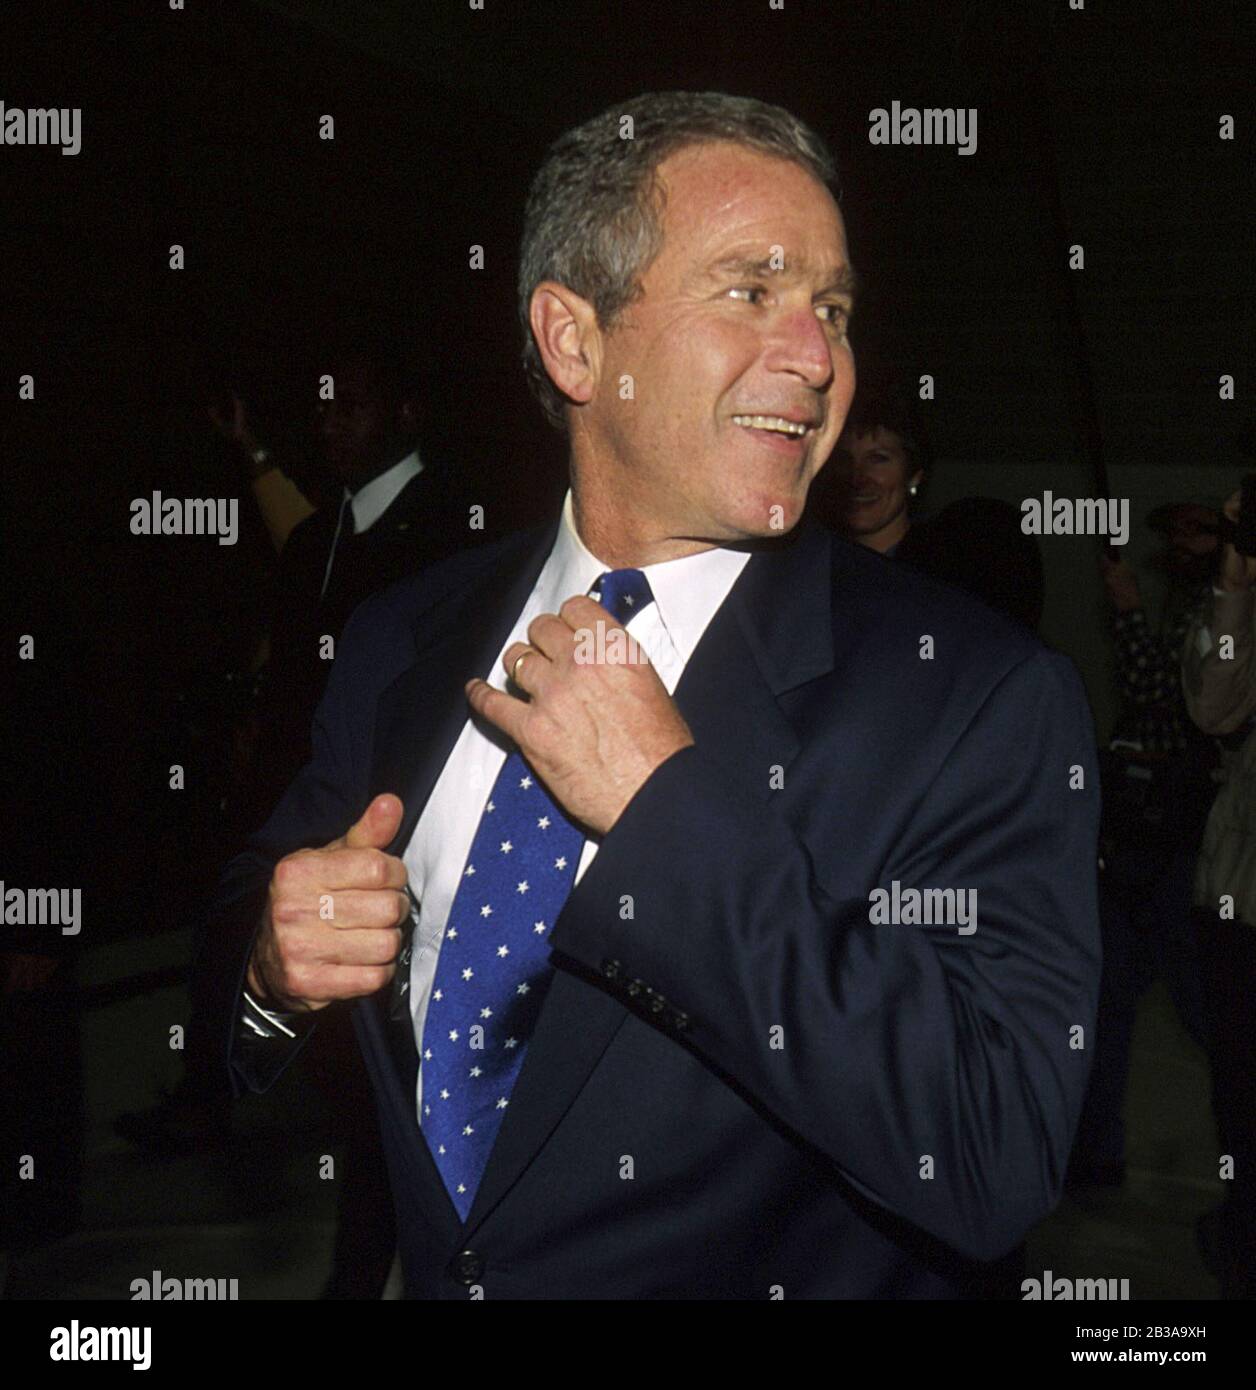 Iowa, USA, January 2000: Texas Governor George W. Bush shows his excitement about winning the Iowa Republican caucuses, giving his presidential campaign an early leg up on his competitors. ©Bob Daemmrich Stock Photo